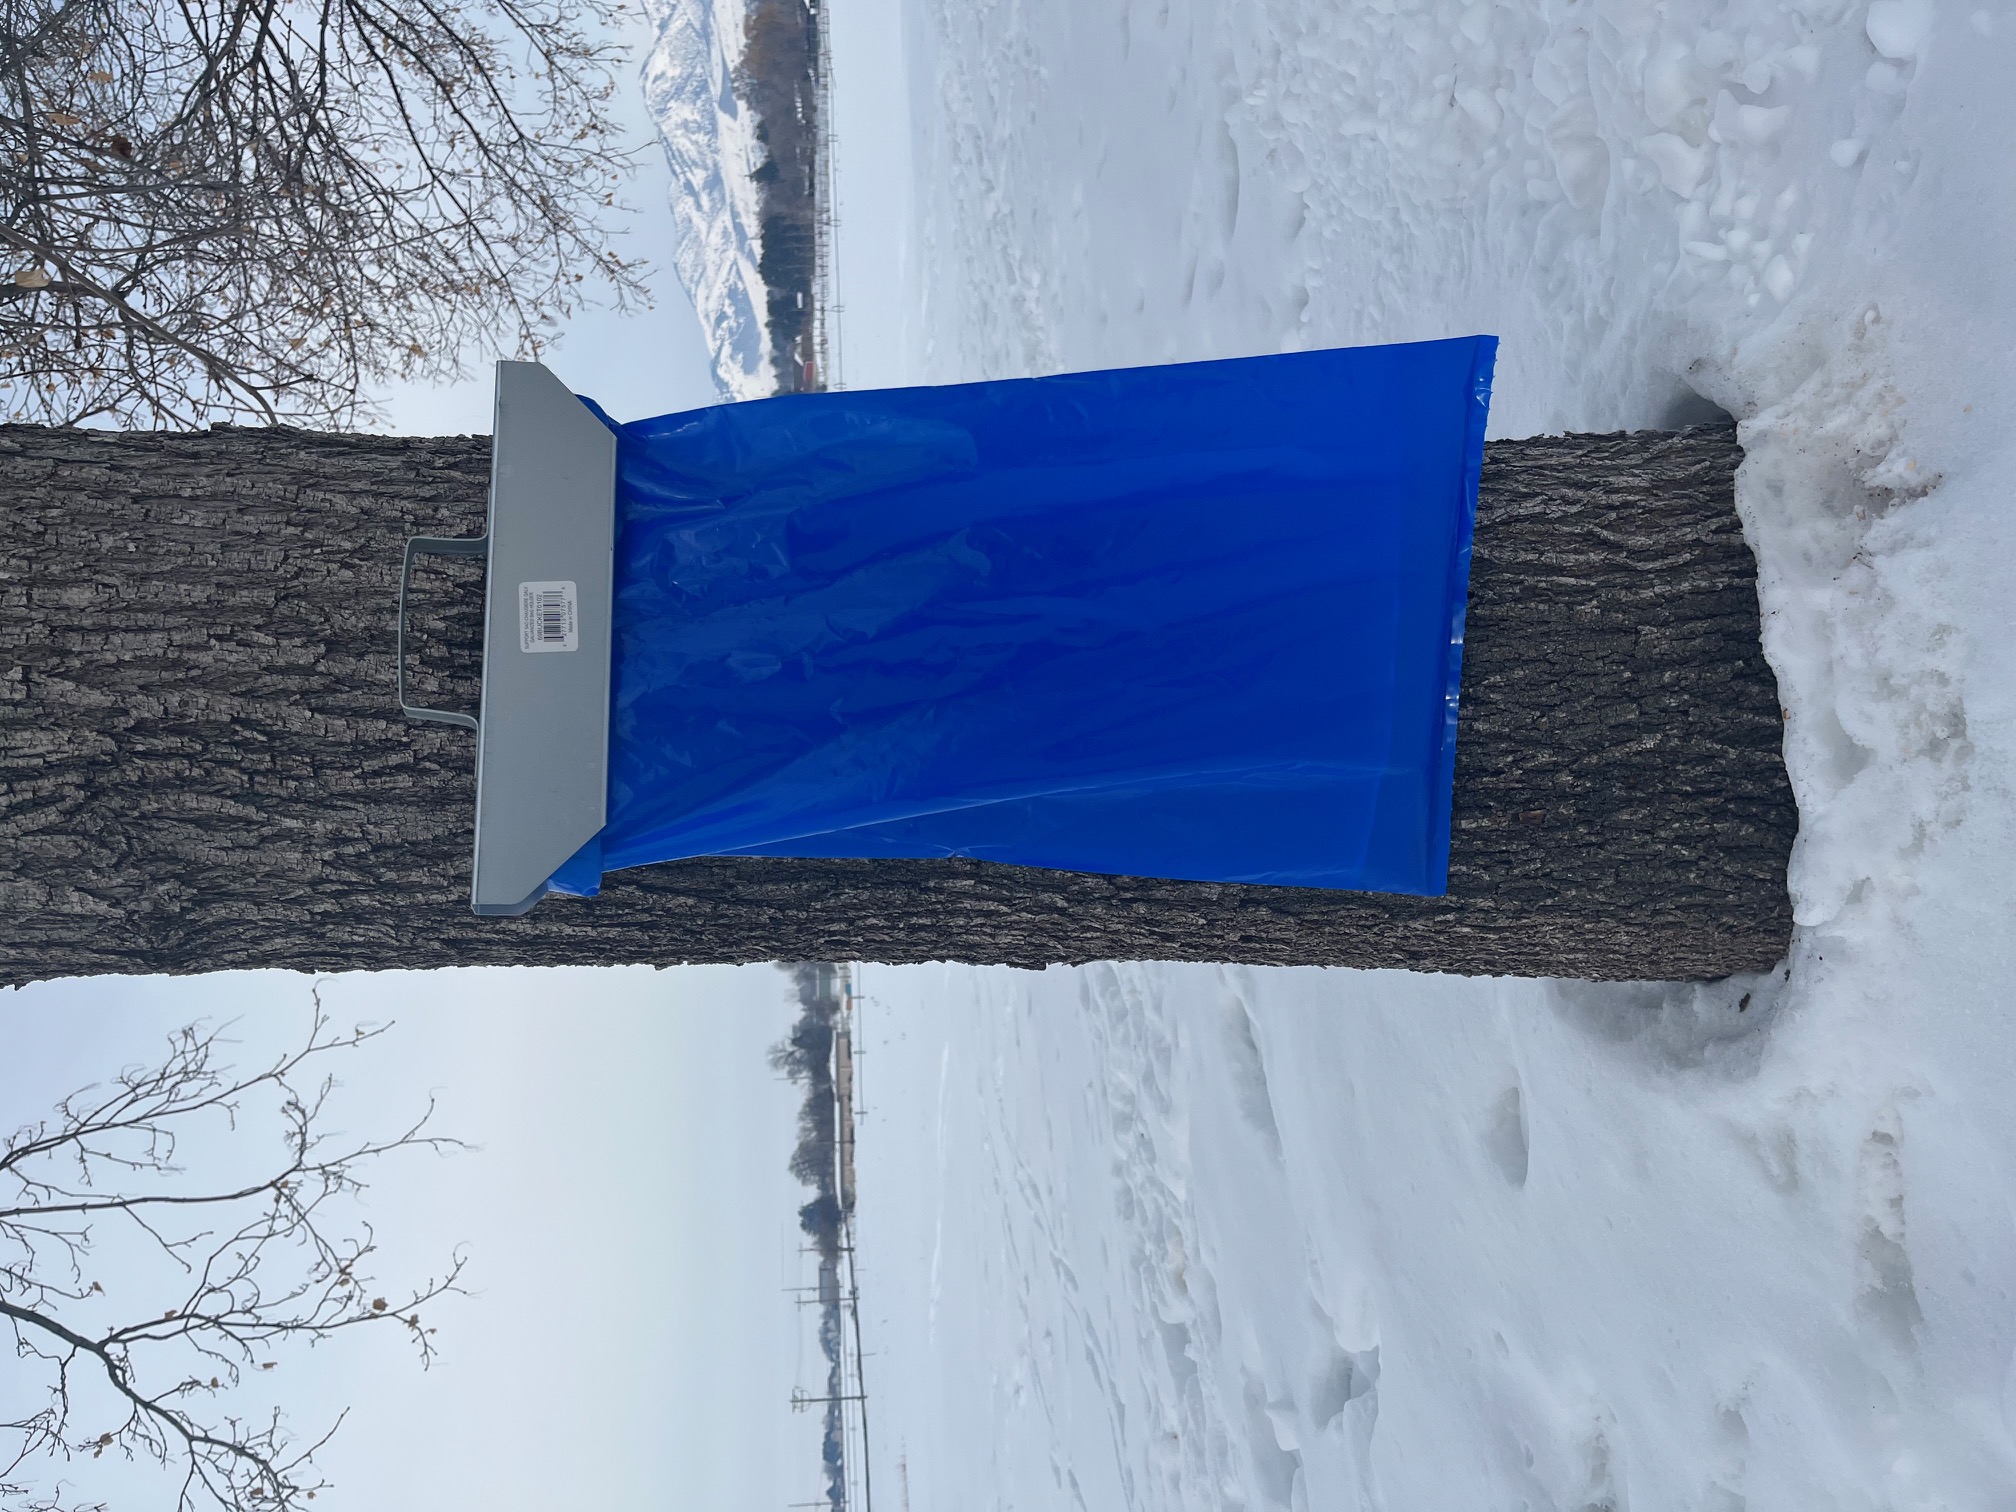 A blue plastic bag hangs from a tree.